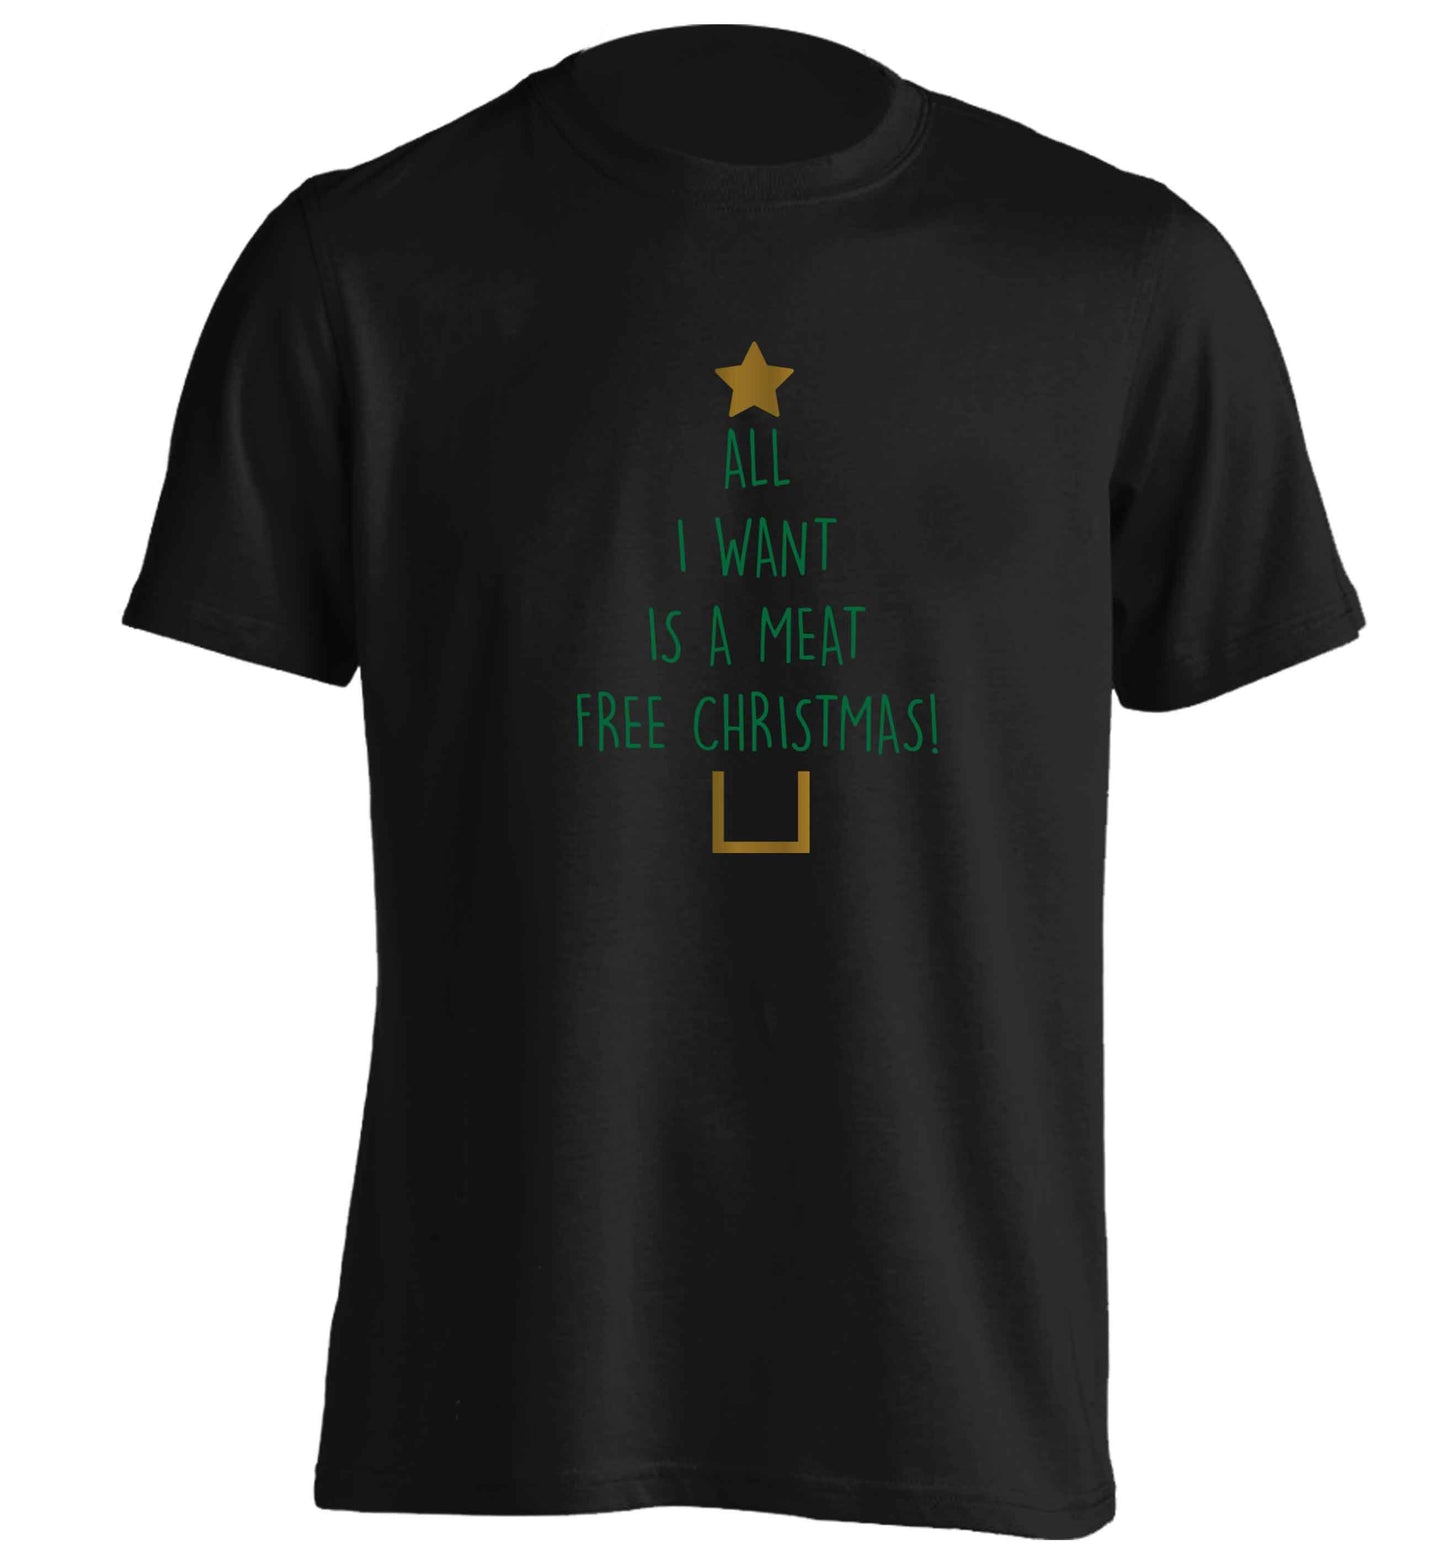 All I want is a meat free Christmas adults unisex black Tshirt 2XL